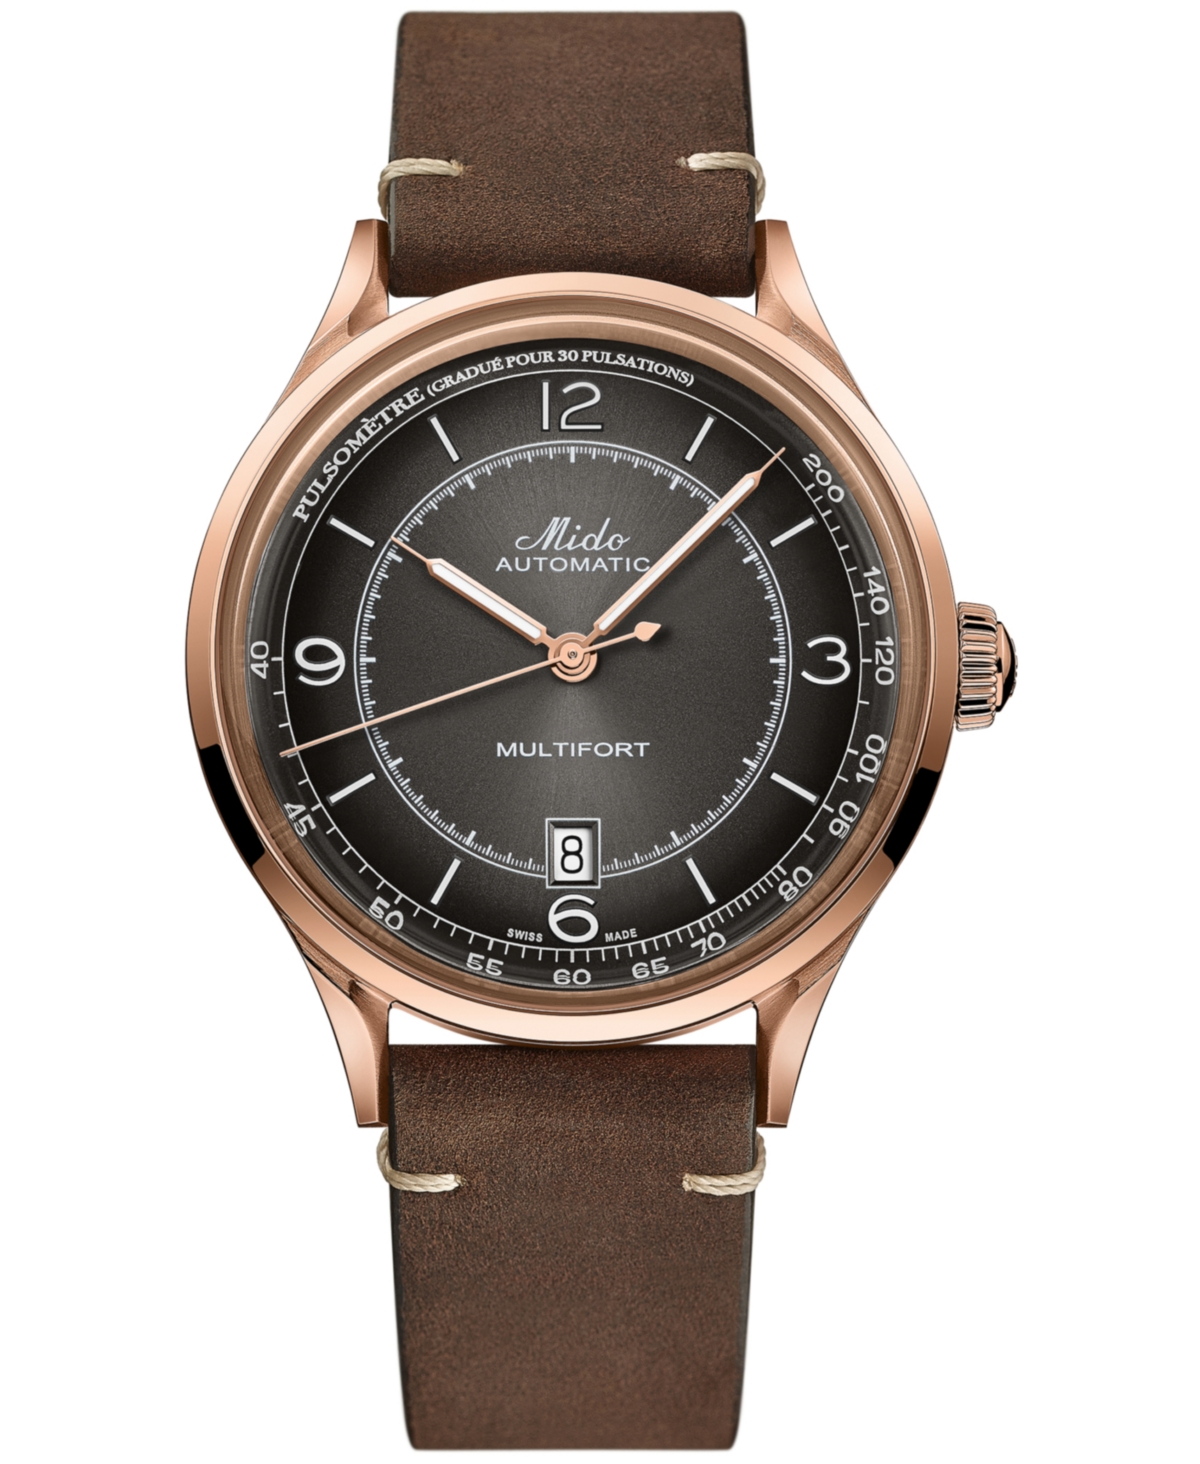 Men's Swiss Automatic Multifort Patrimony Pulsometer Brown Leather Strap Watch 40mm - Brown